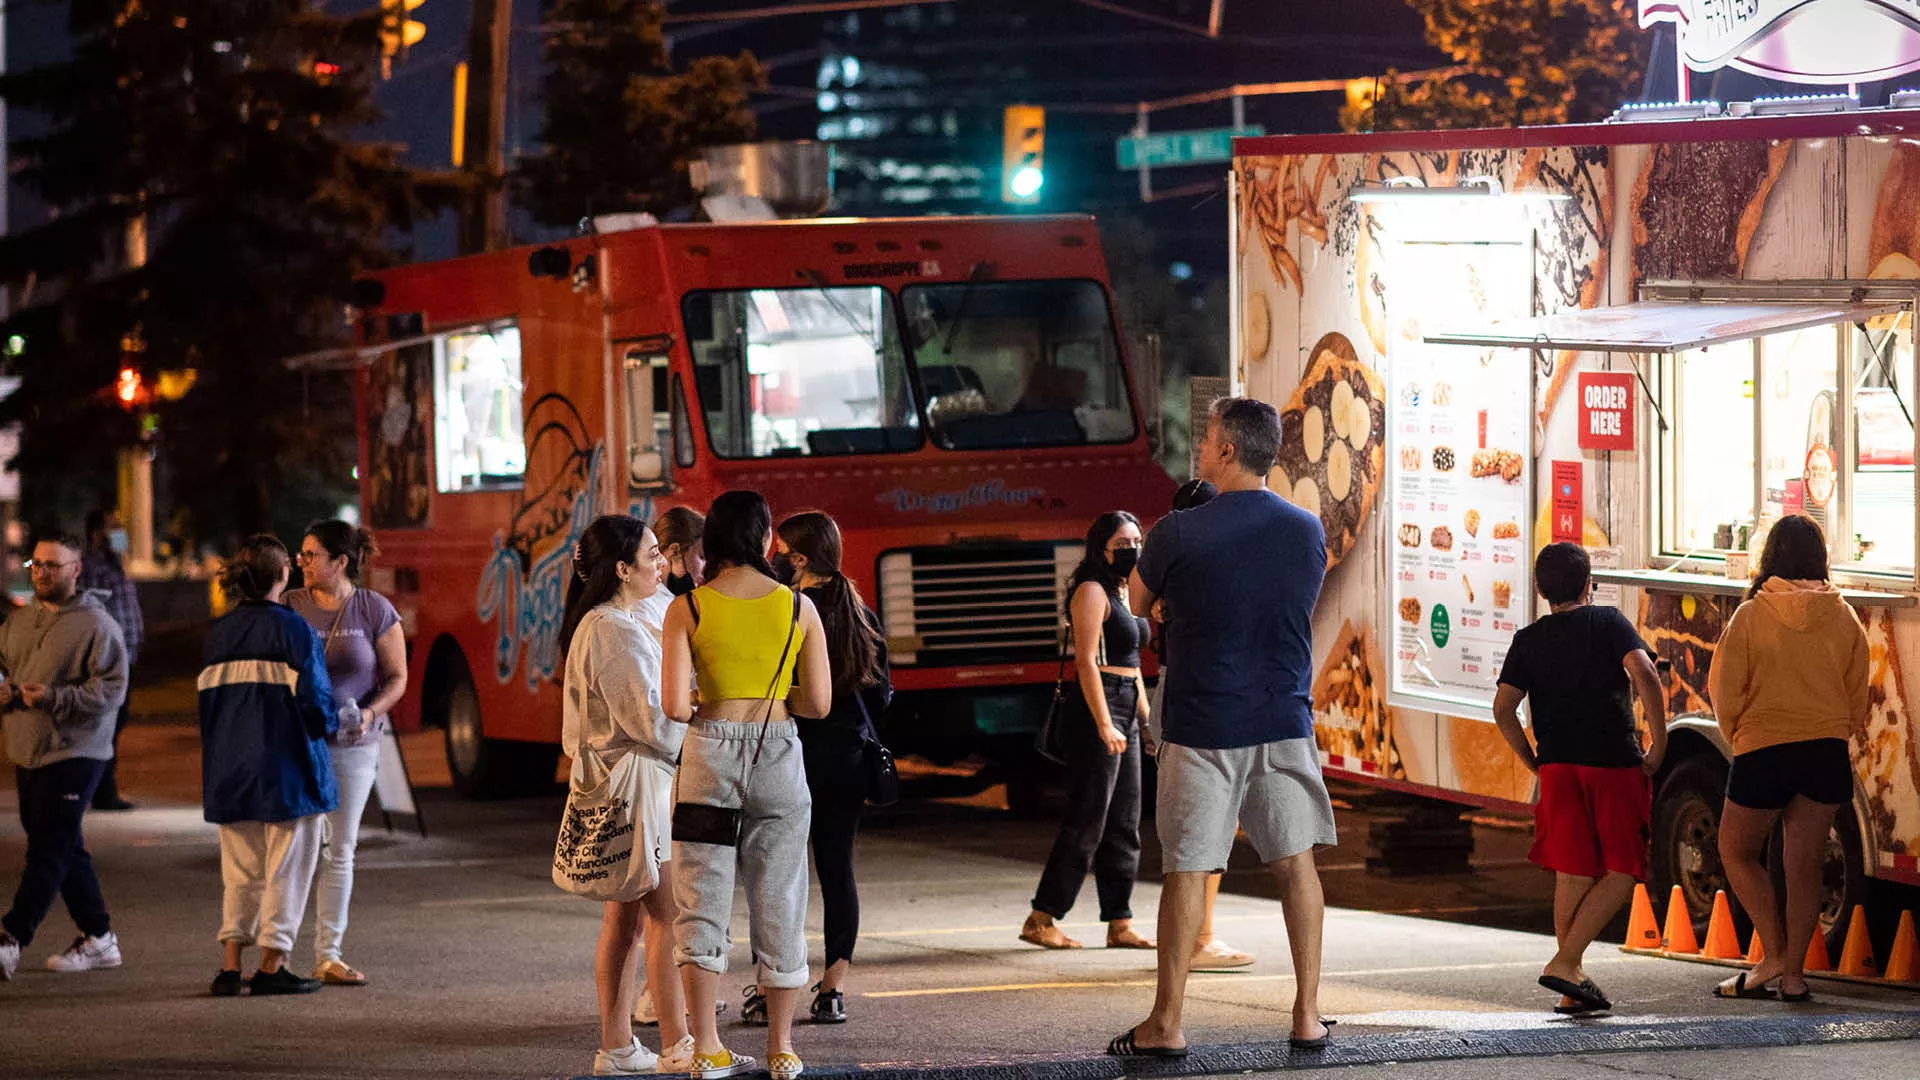 People lining outside a food truck at night